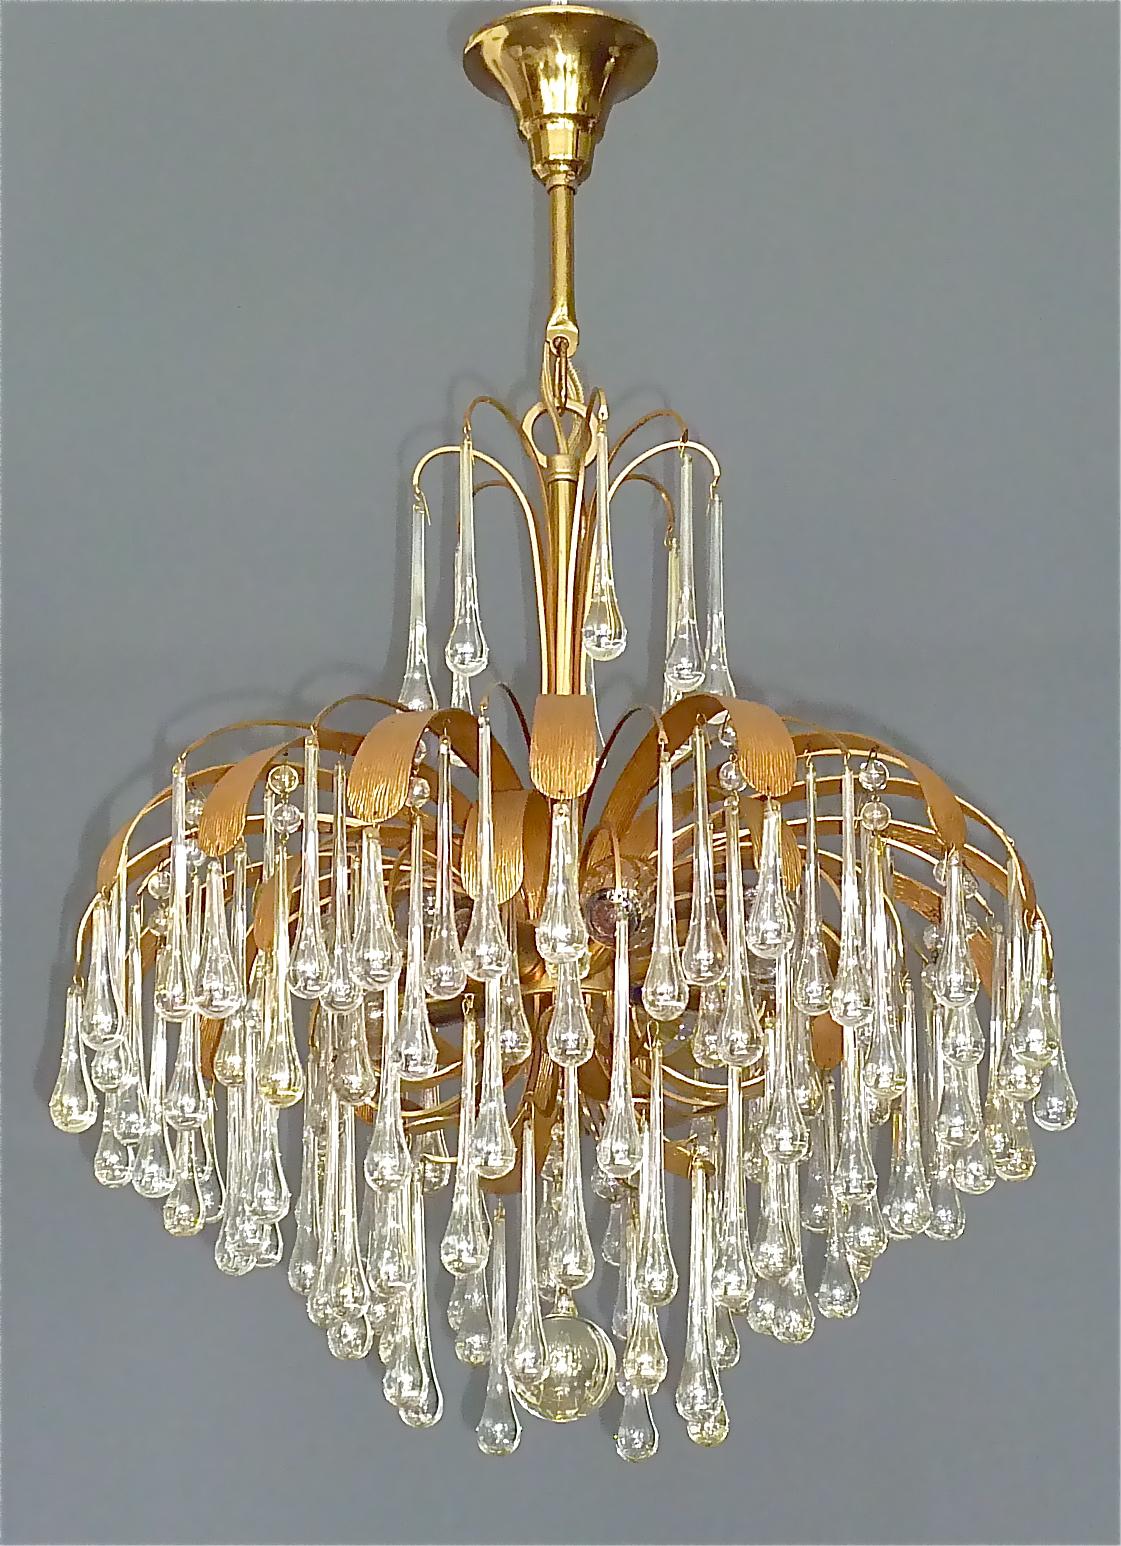 Large signed gilt brass flower sputnik chandelier with elongated slightly tinted shimmering Murano glass drops and pearls made by Palwa, very in the style of Venini, Germany circa 1960-1970s. The gorgeous pendant lamp has a gilt brass metal sputnik